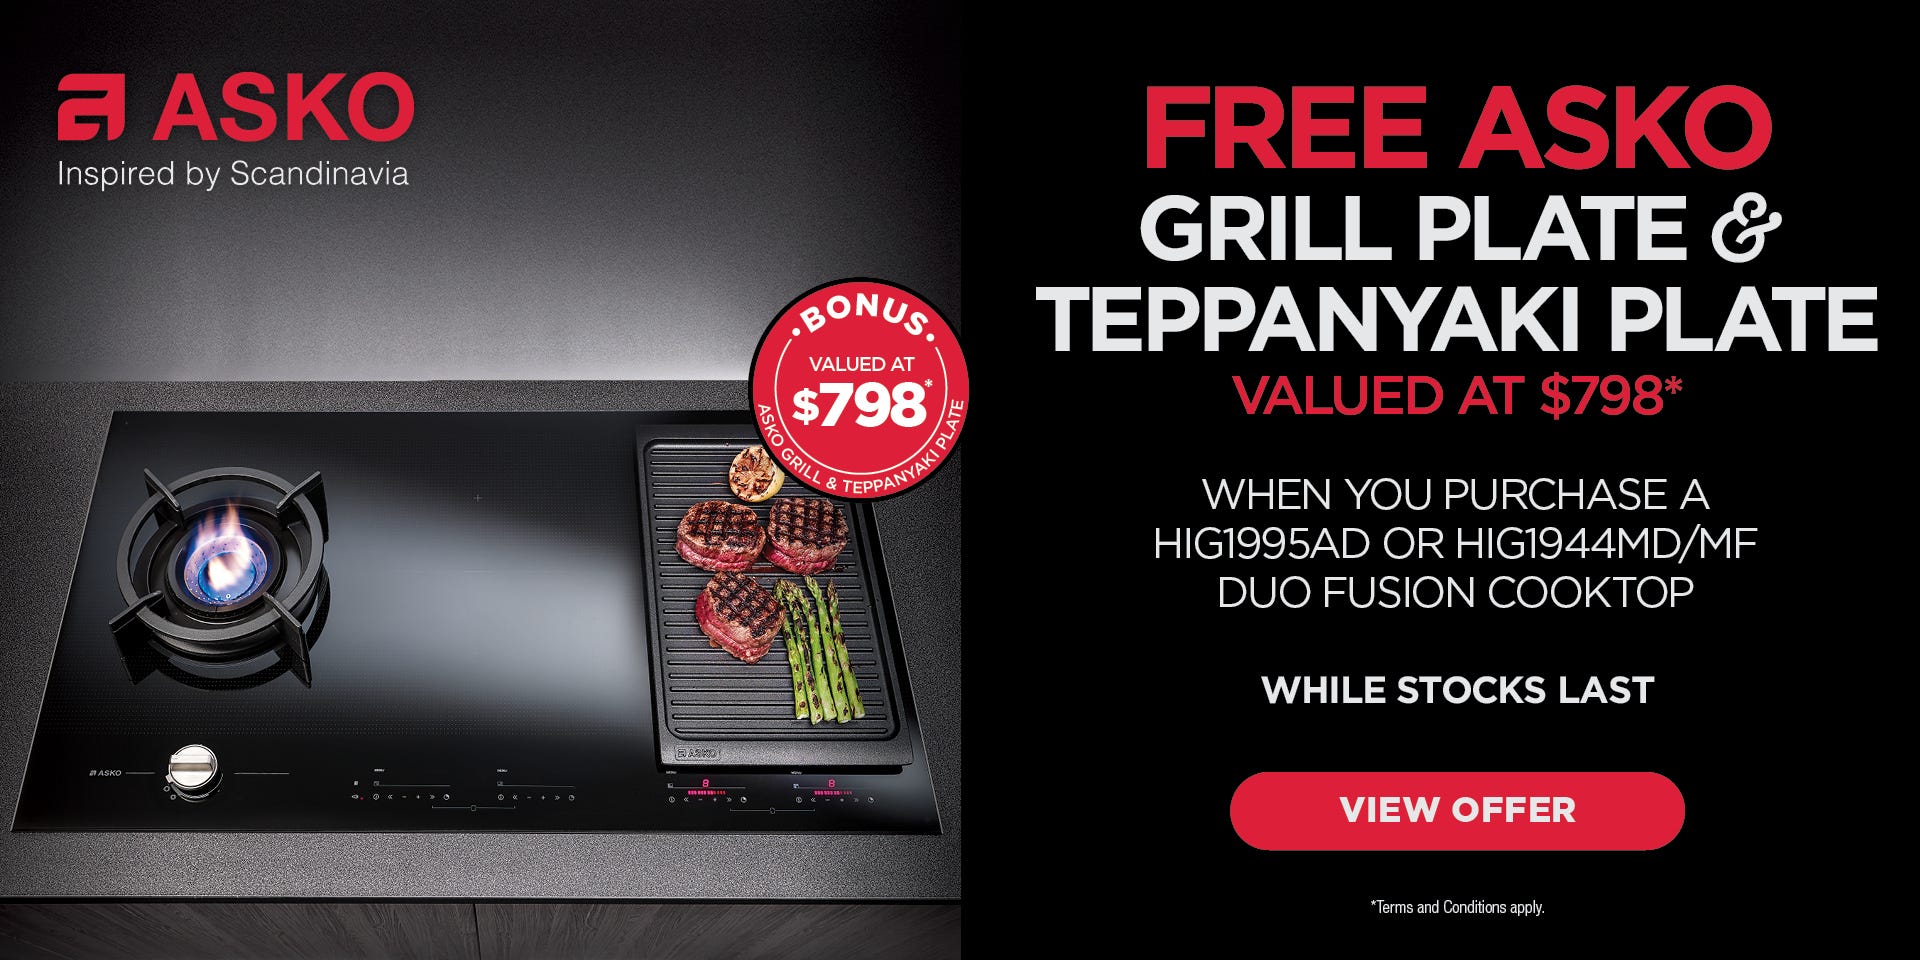 Free ASKO grill plate & teppanyaki plate when you purchase an eligible DuoFusion cooktop. Conditions apply - While stocks last!!